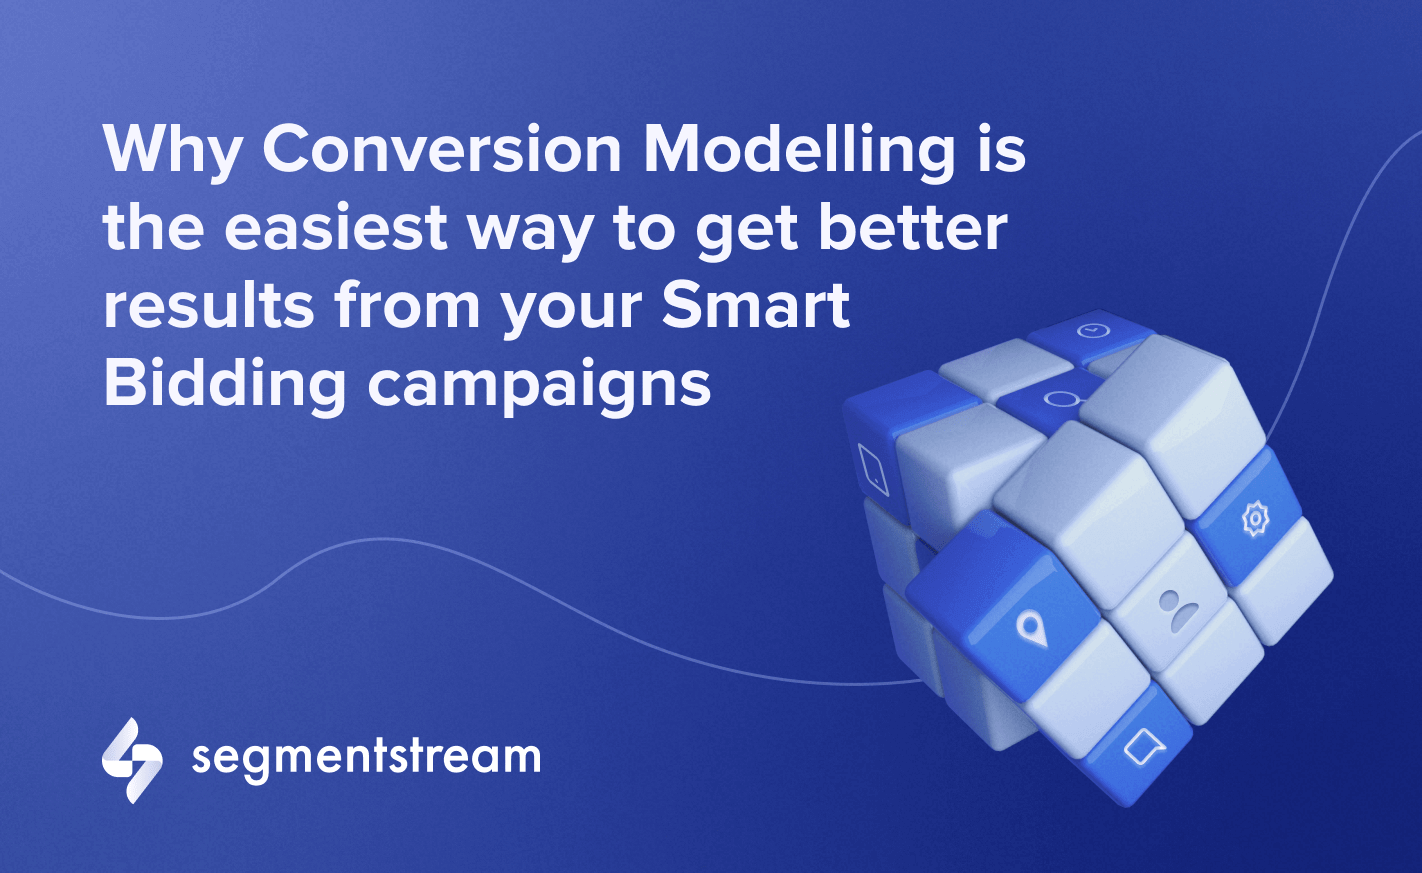 Why Conversion Modelling is the easiest way to get better results from Smart Bidding ad campaigns